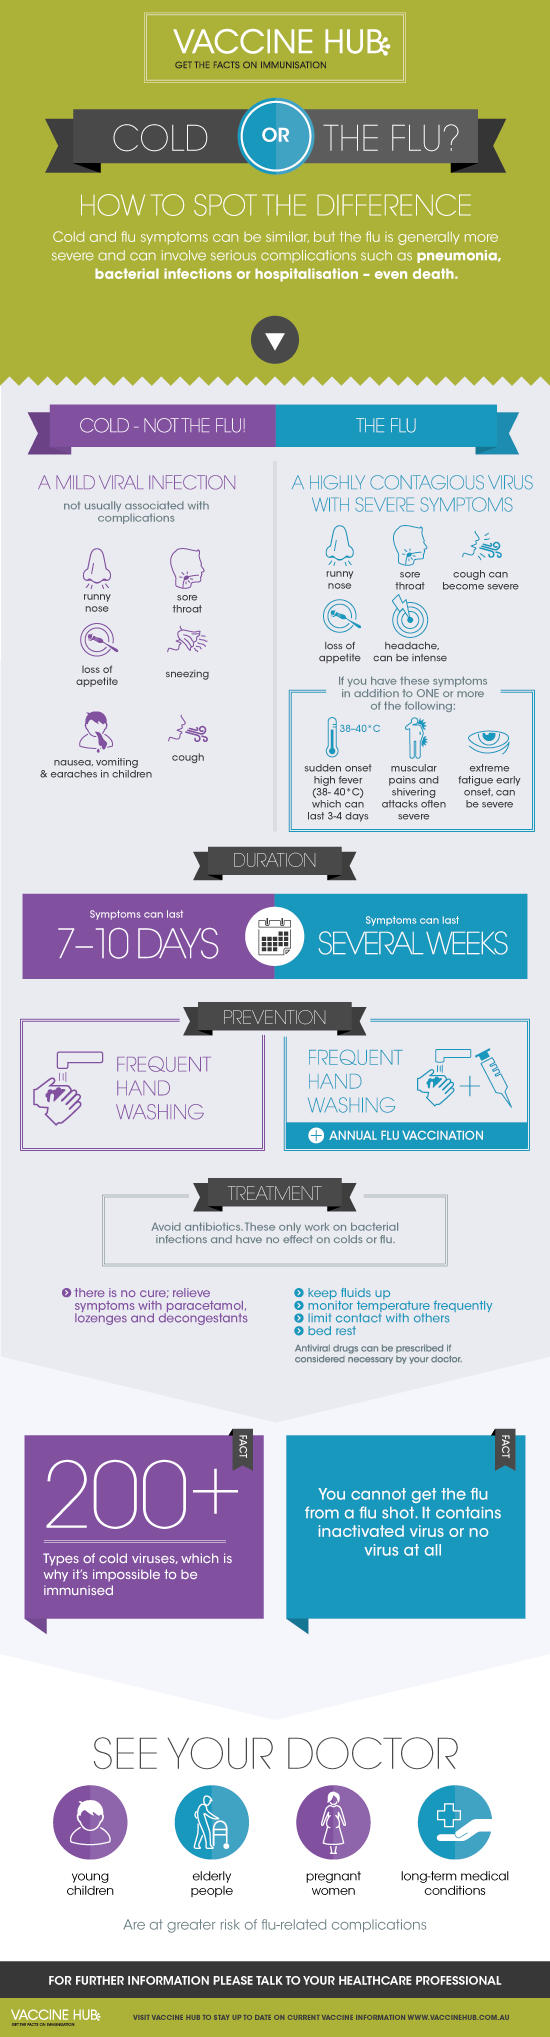 Cold or the Flu? How to Spot the Difference infographic